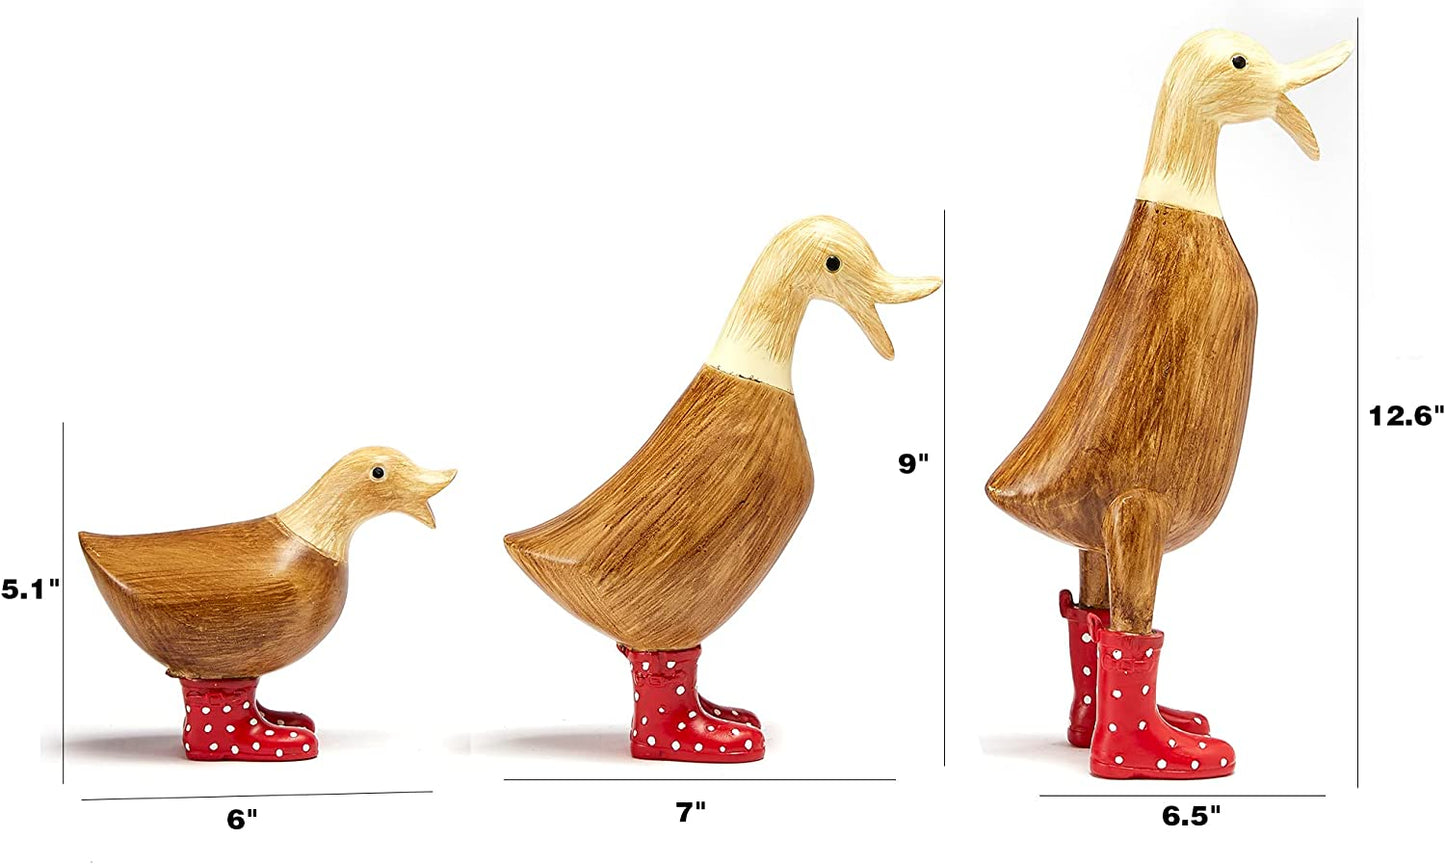 Size measurements for 3 garden ducks wearing red and white wellington boots. The three sizes measurements are, 5.1 inches, 9 inches and 12.6 inches